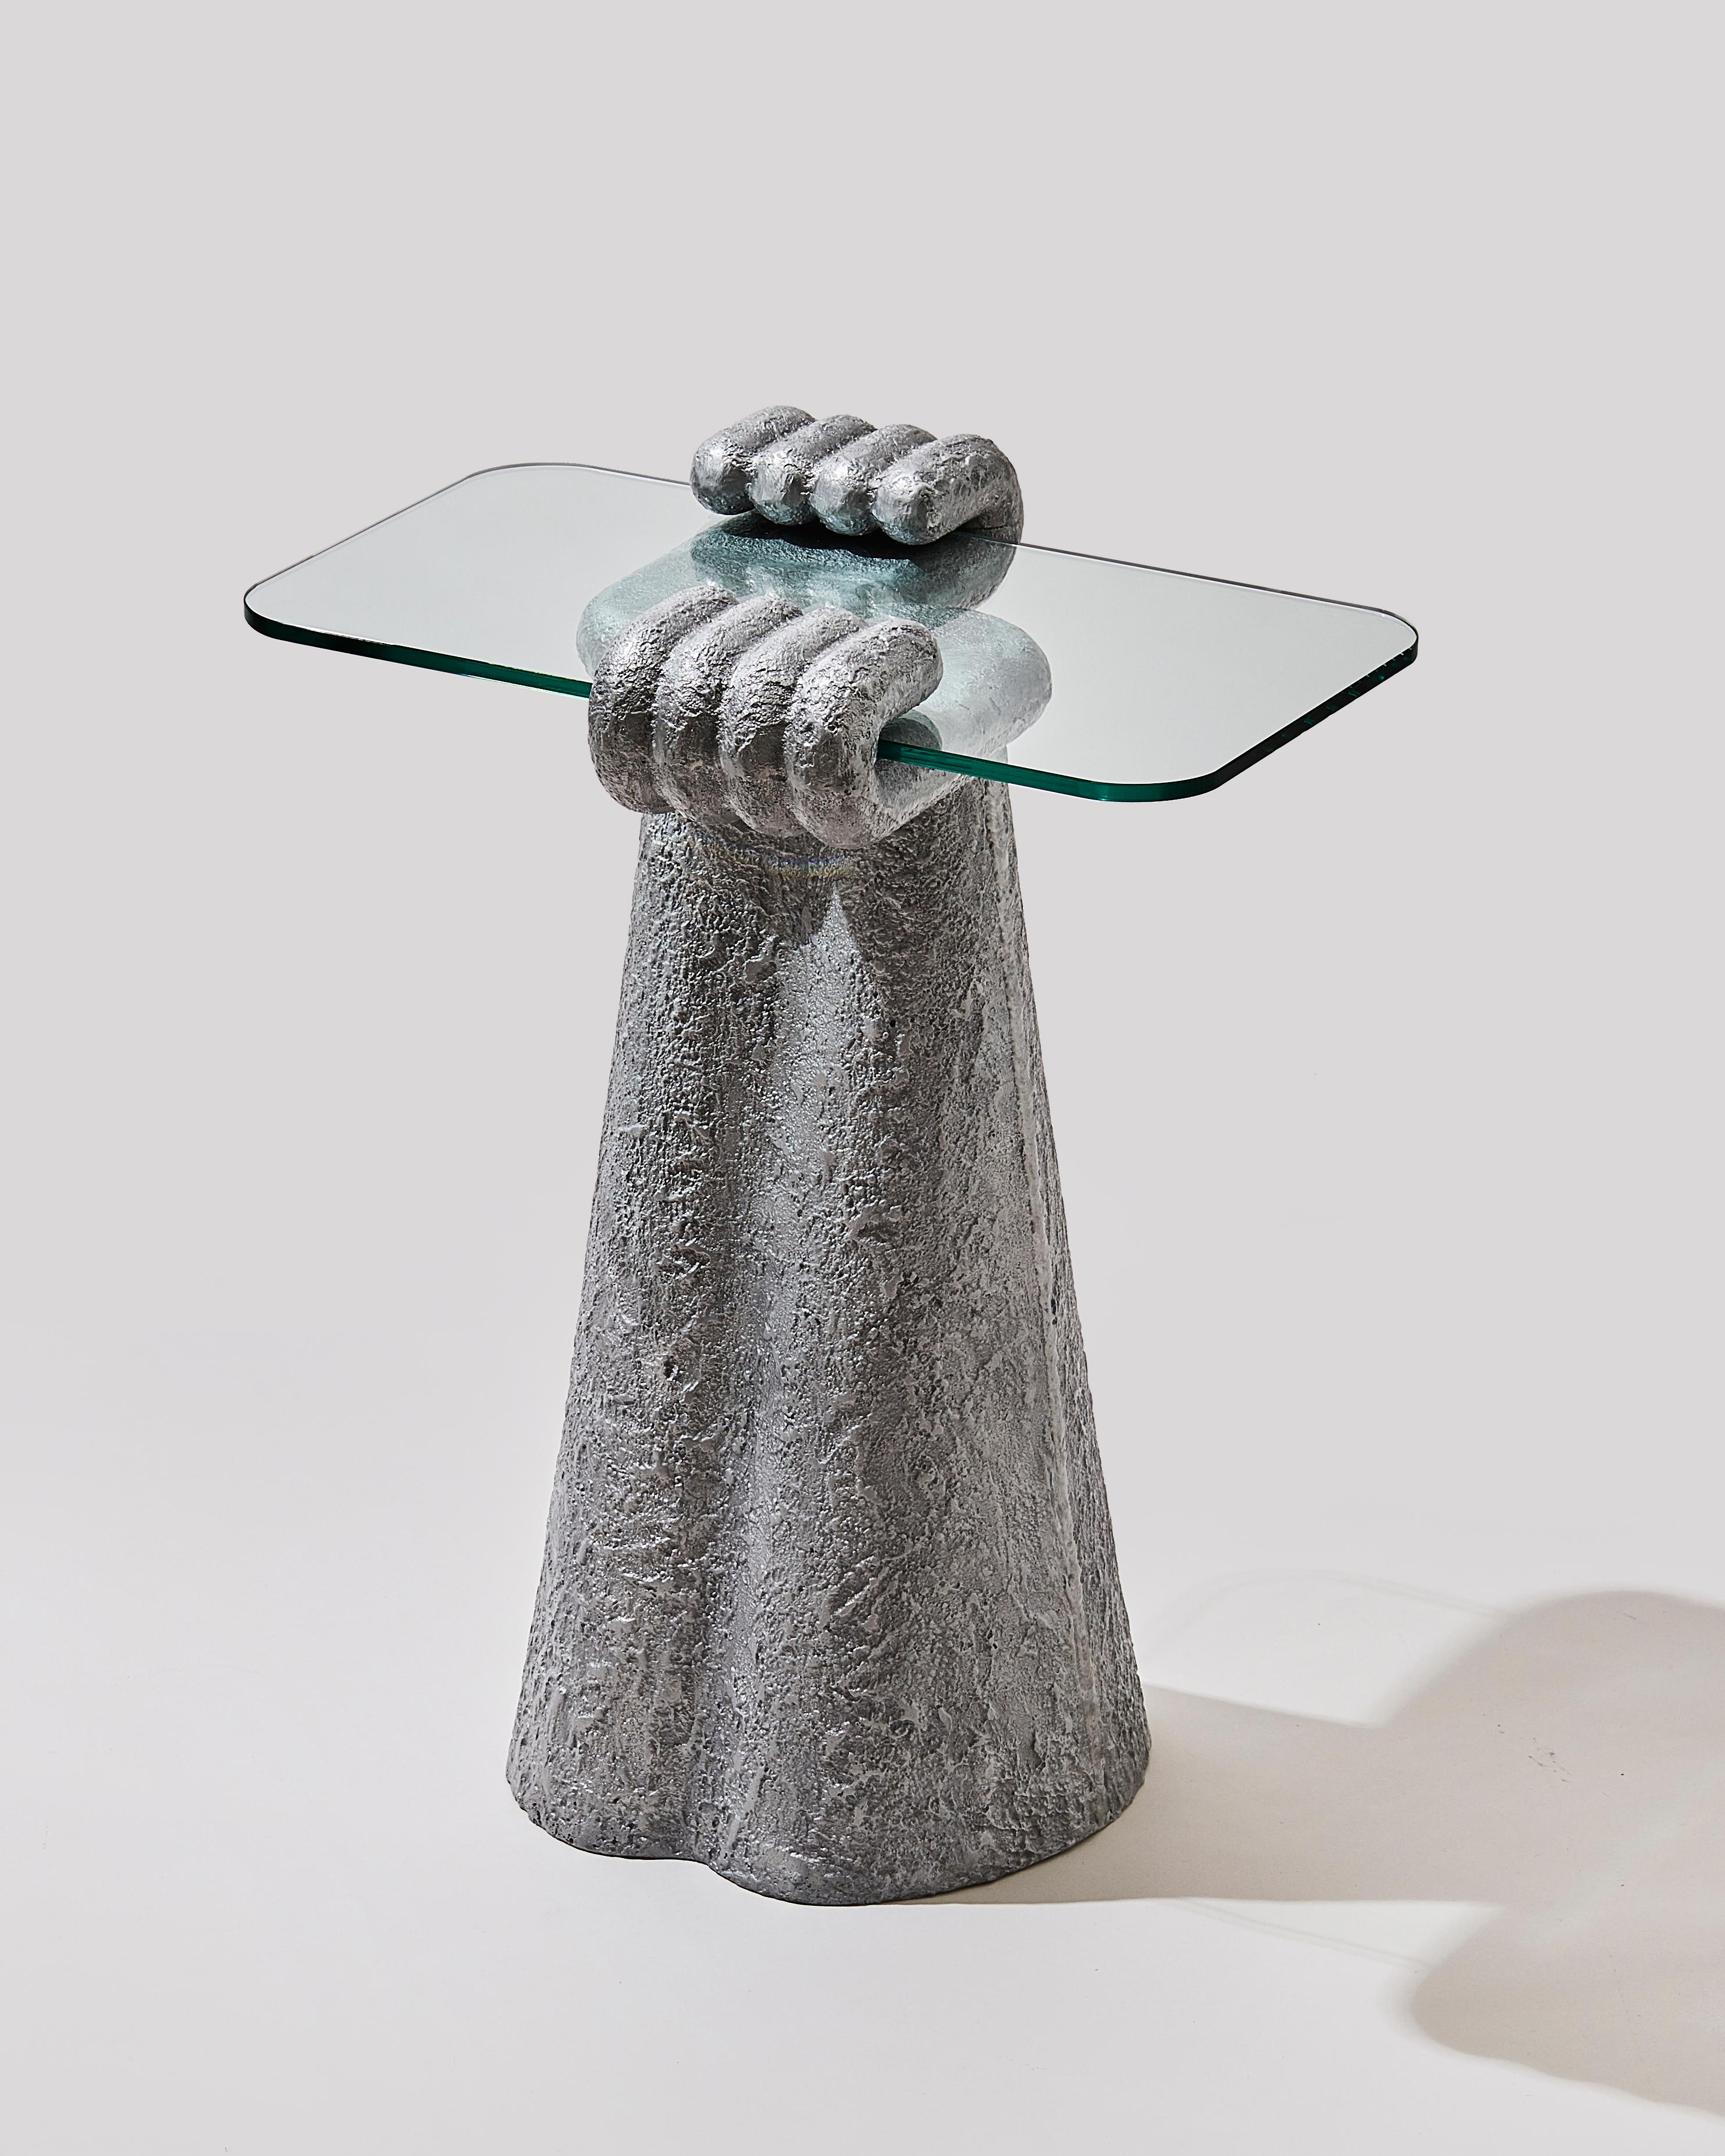 Paw side table by Hakmin Lee
Materials: Aluminium, glass
Dimensions: 50 x 45 x 70 cm

Studio HAK is Seoul based studio led by designer Hakmin Lee, who has an ambition of creating our environment bit more humorous through everyday